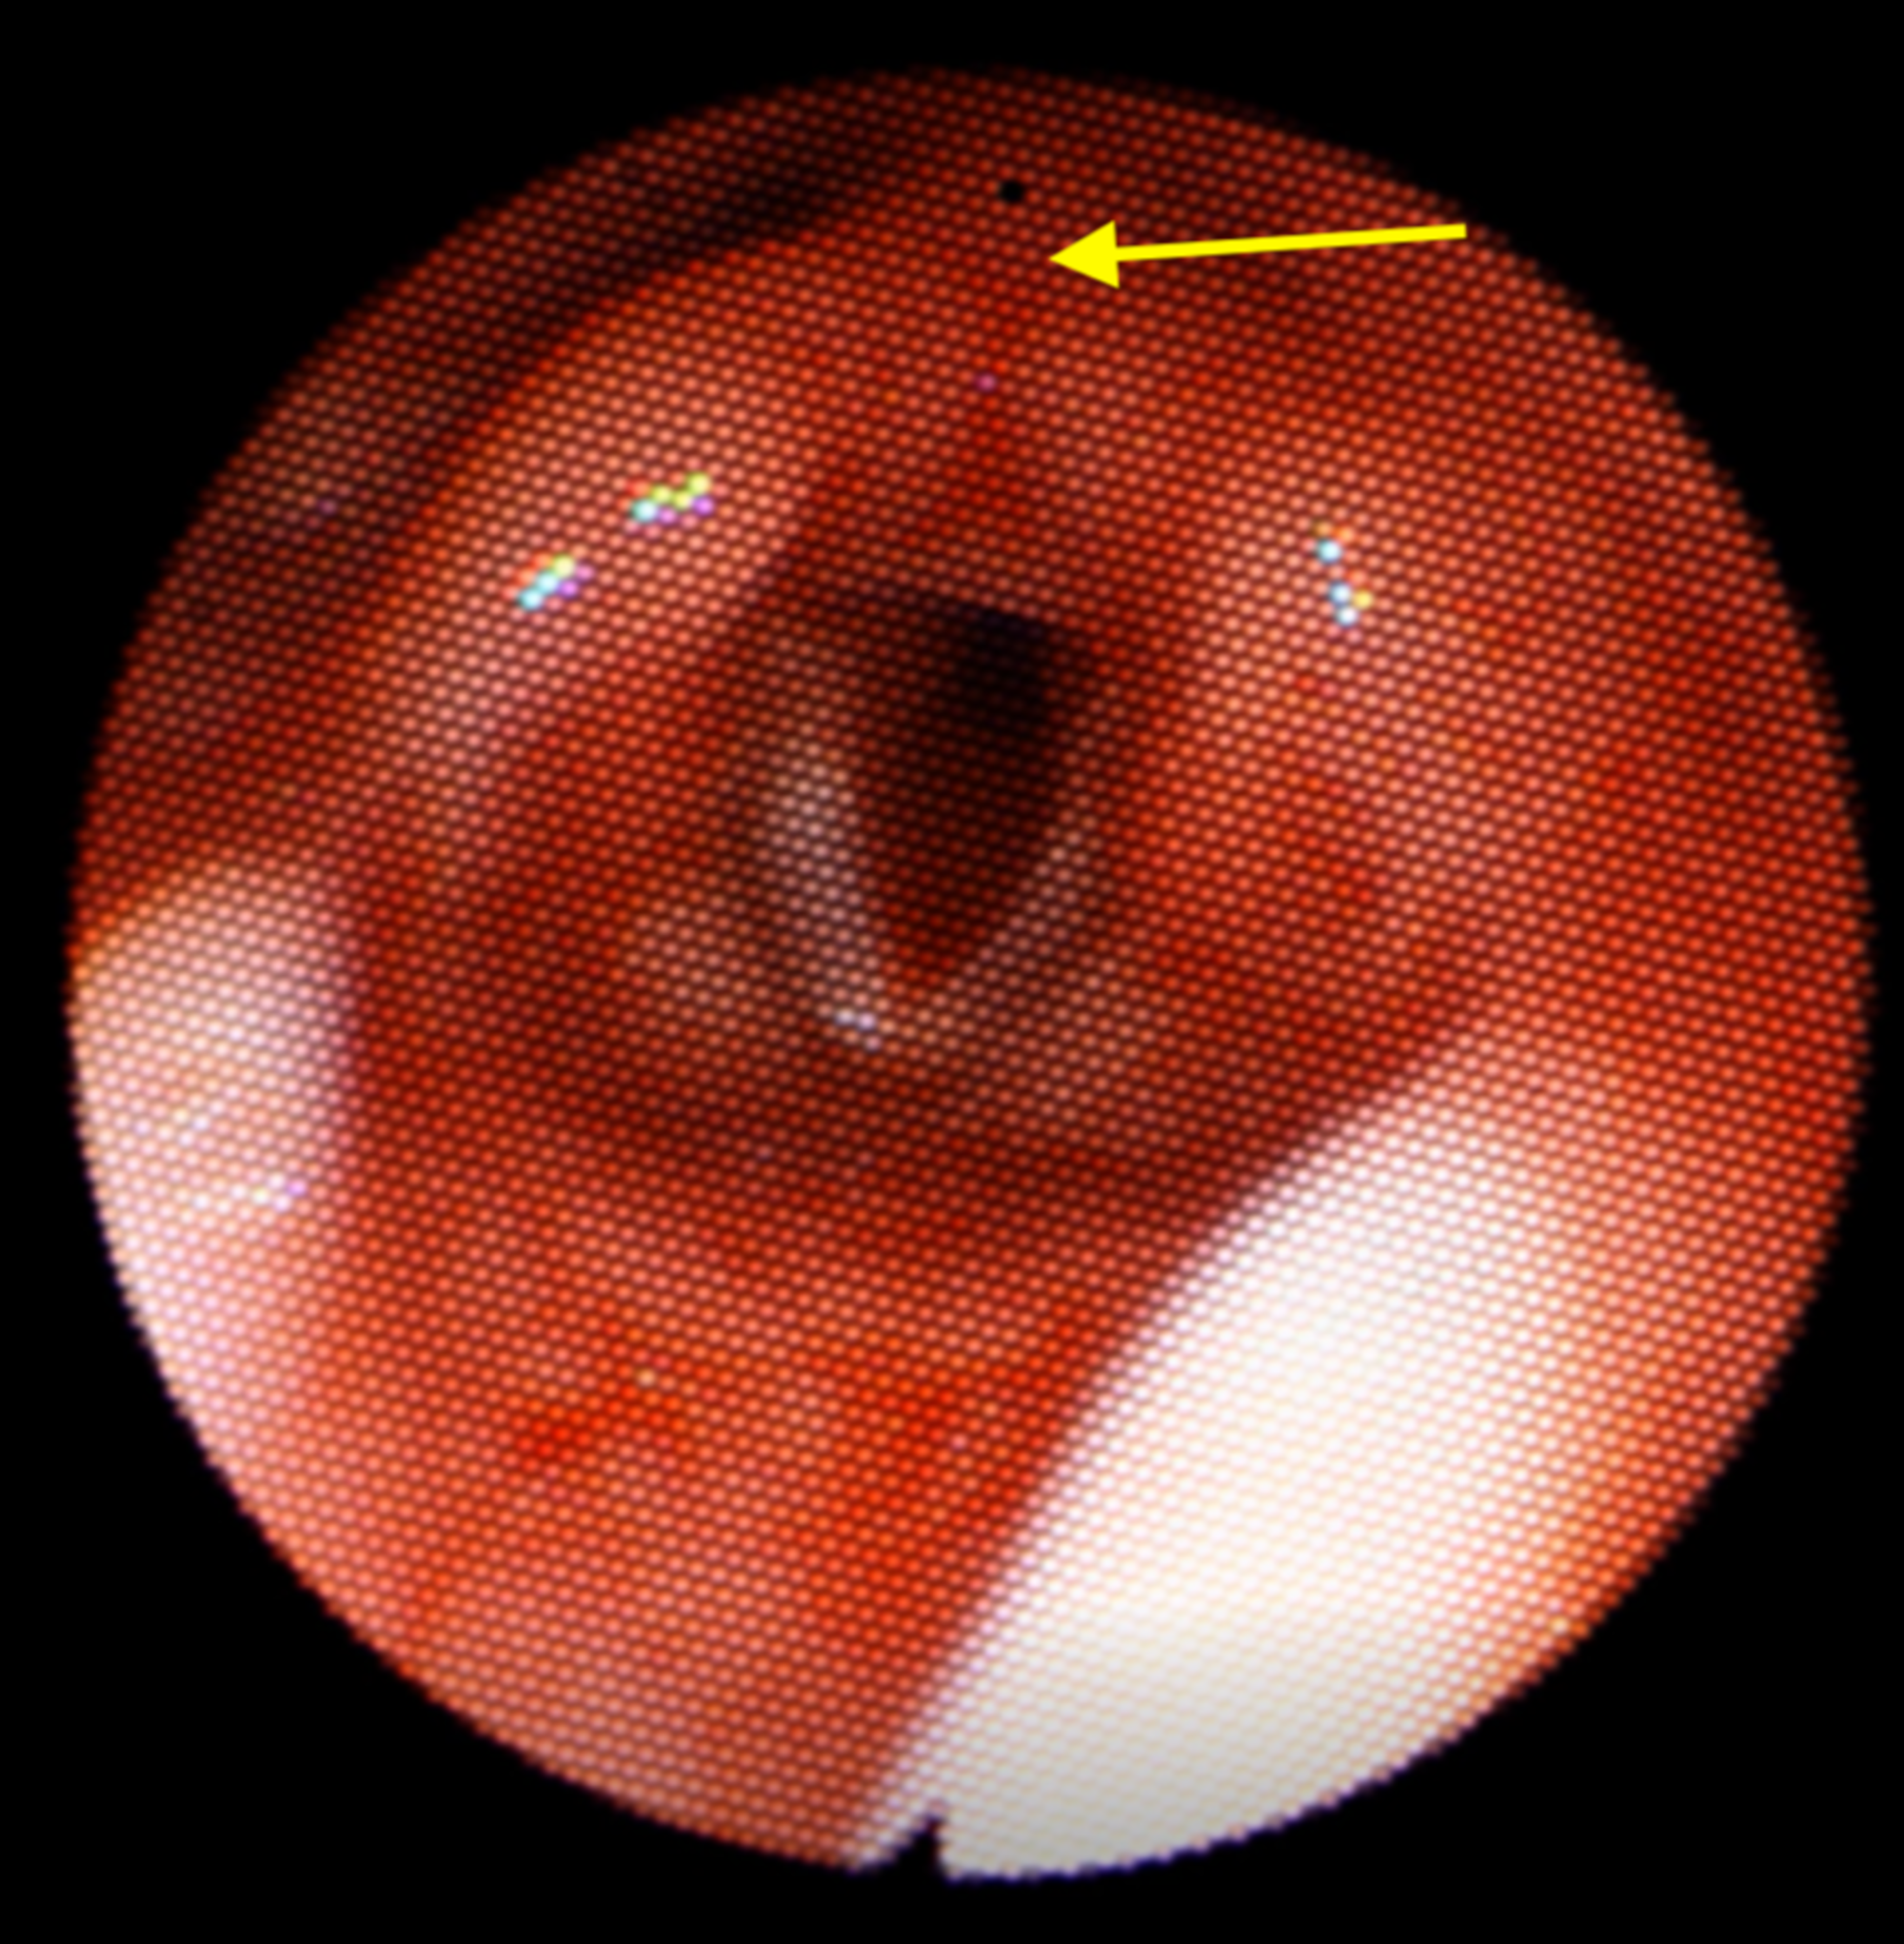 Cureus Paradoxical Vocal Cord Motion Presaging Bilateral Vocal Cord Paresis In An Infant 5903